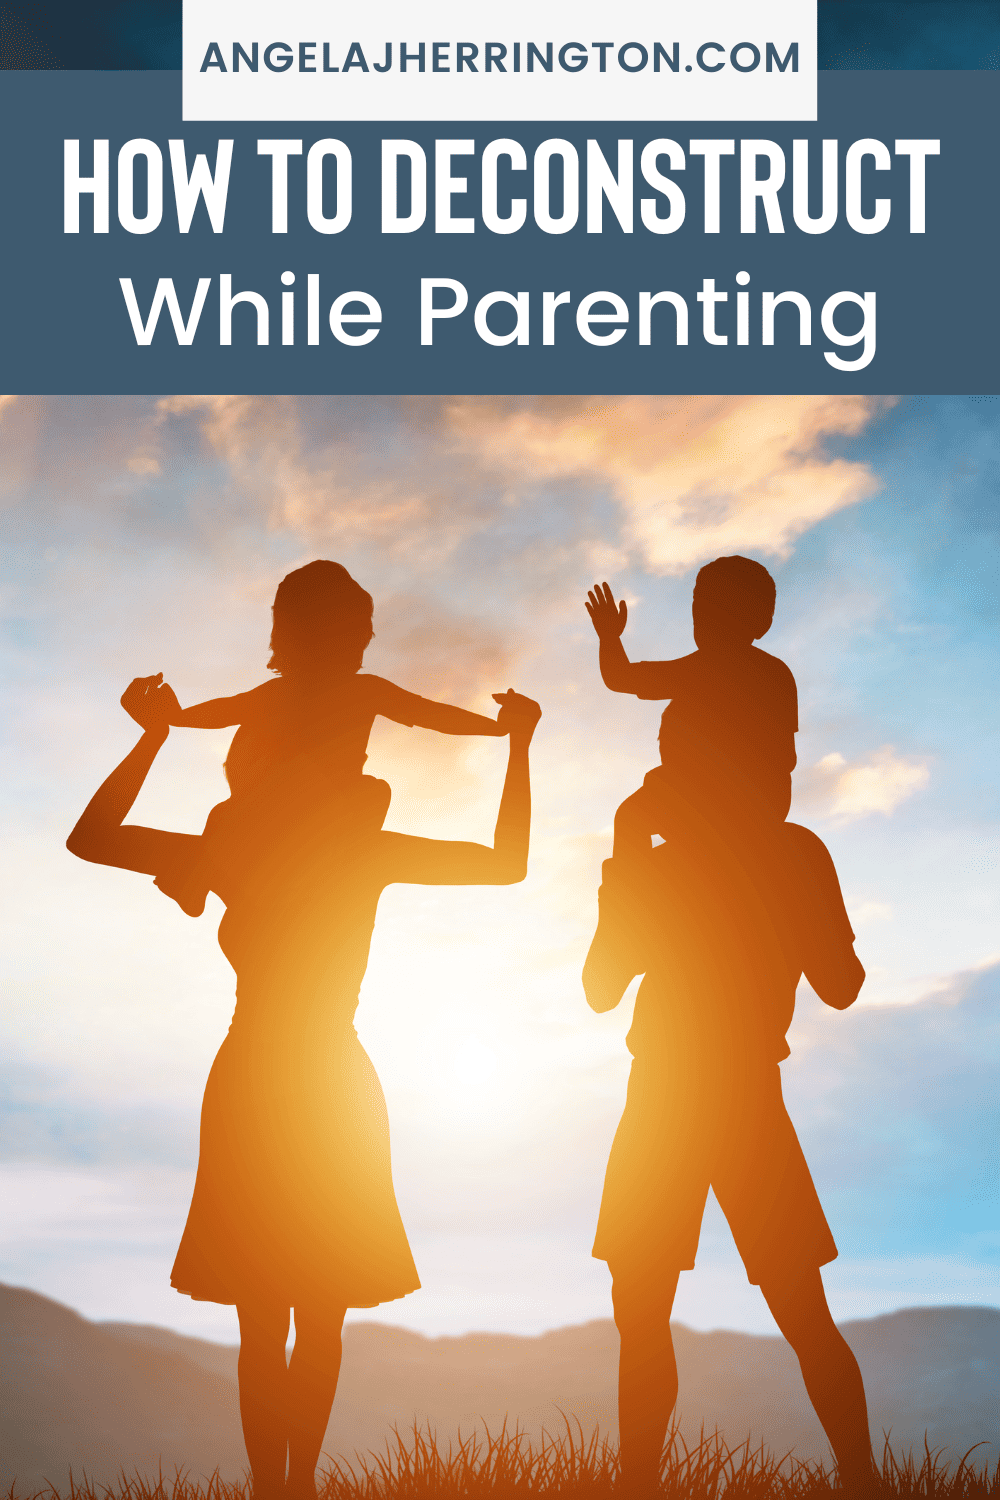 deconstructing while parenting written in white on blue background. 2 parents playing with their kids in the sunset. 